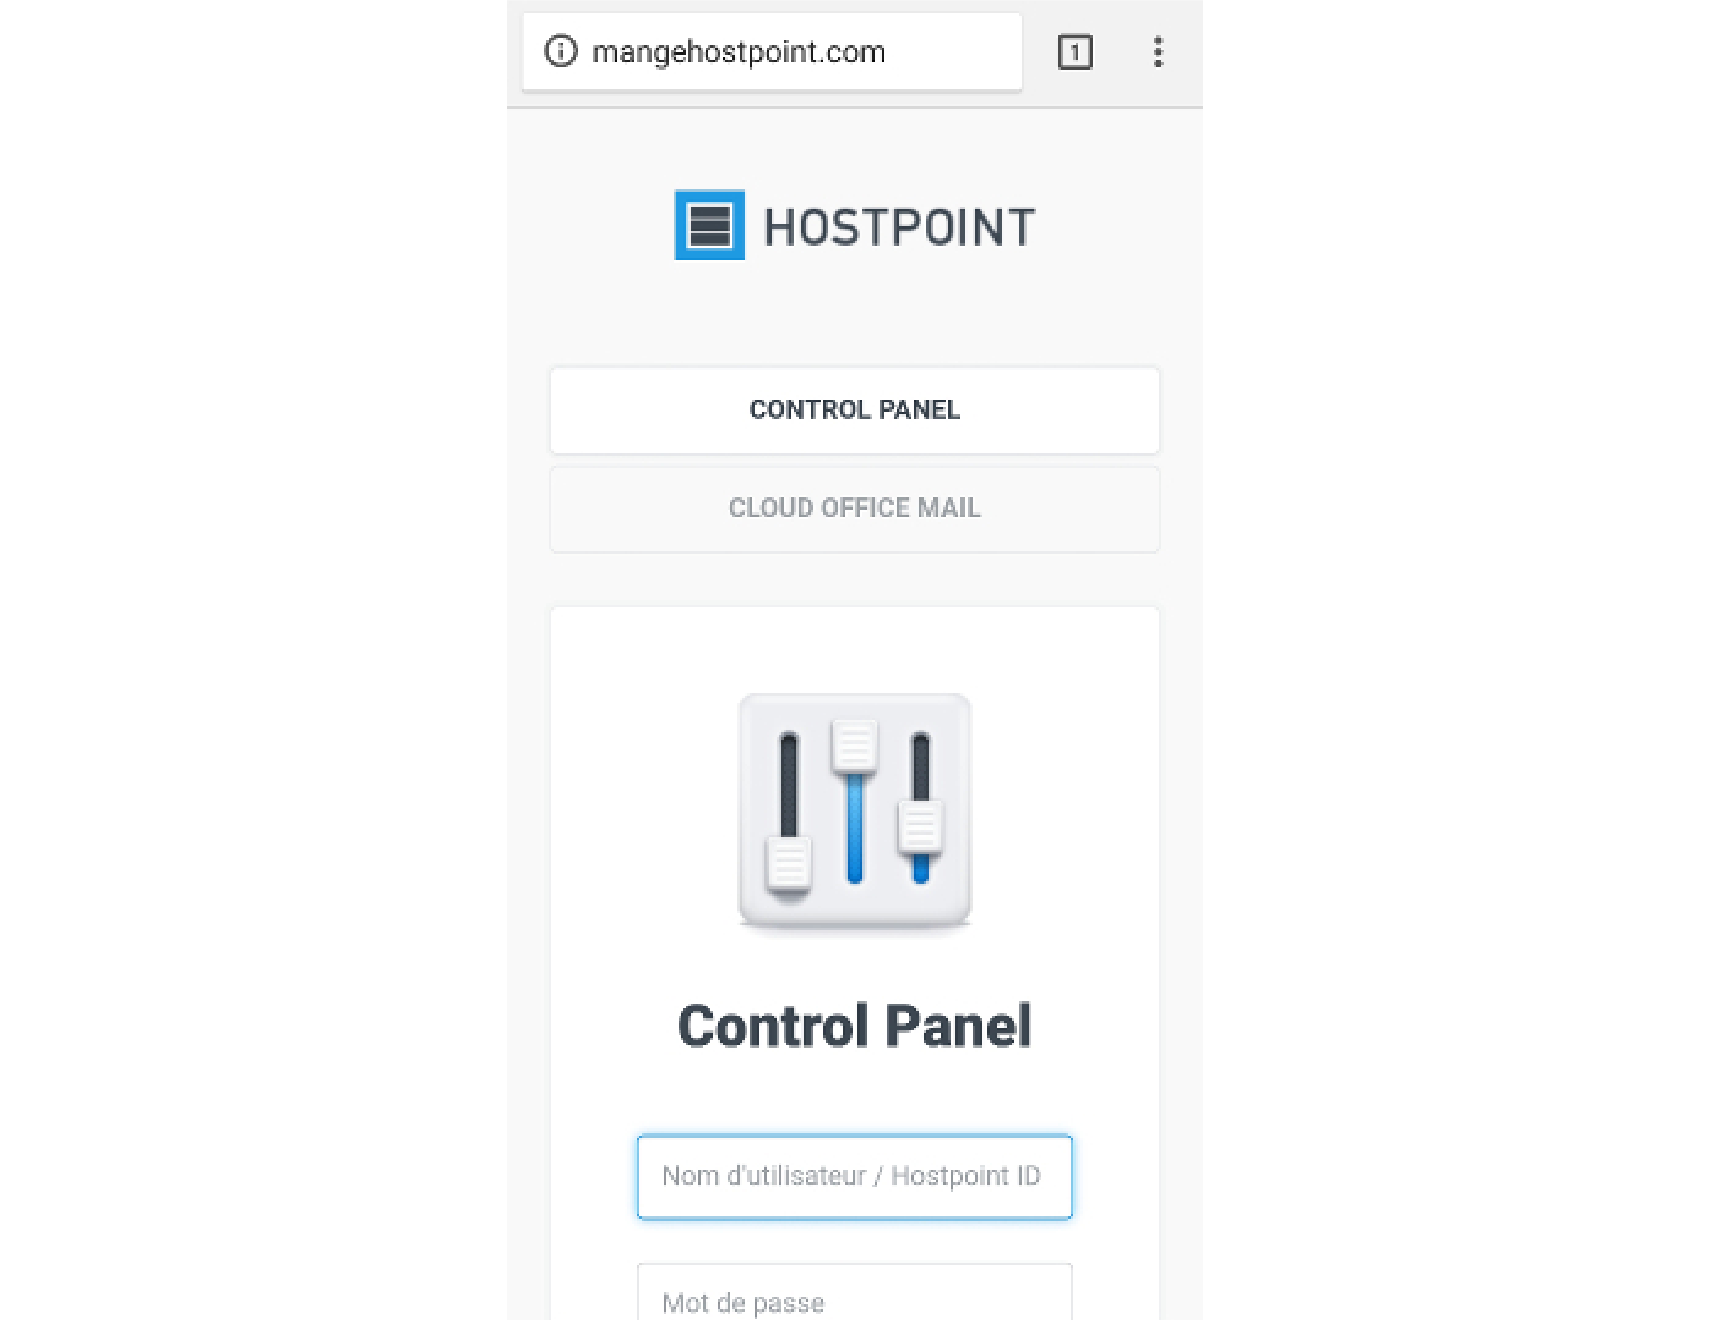 Replicated login window of the Hostpoint Control Panel. Pay attention to the URL in the browser address bar!